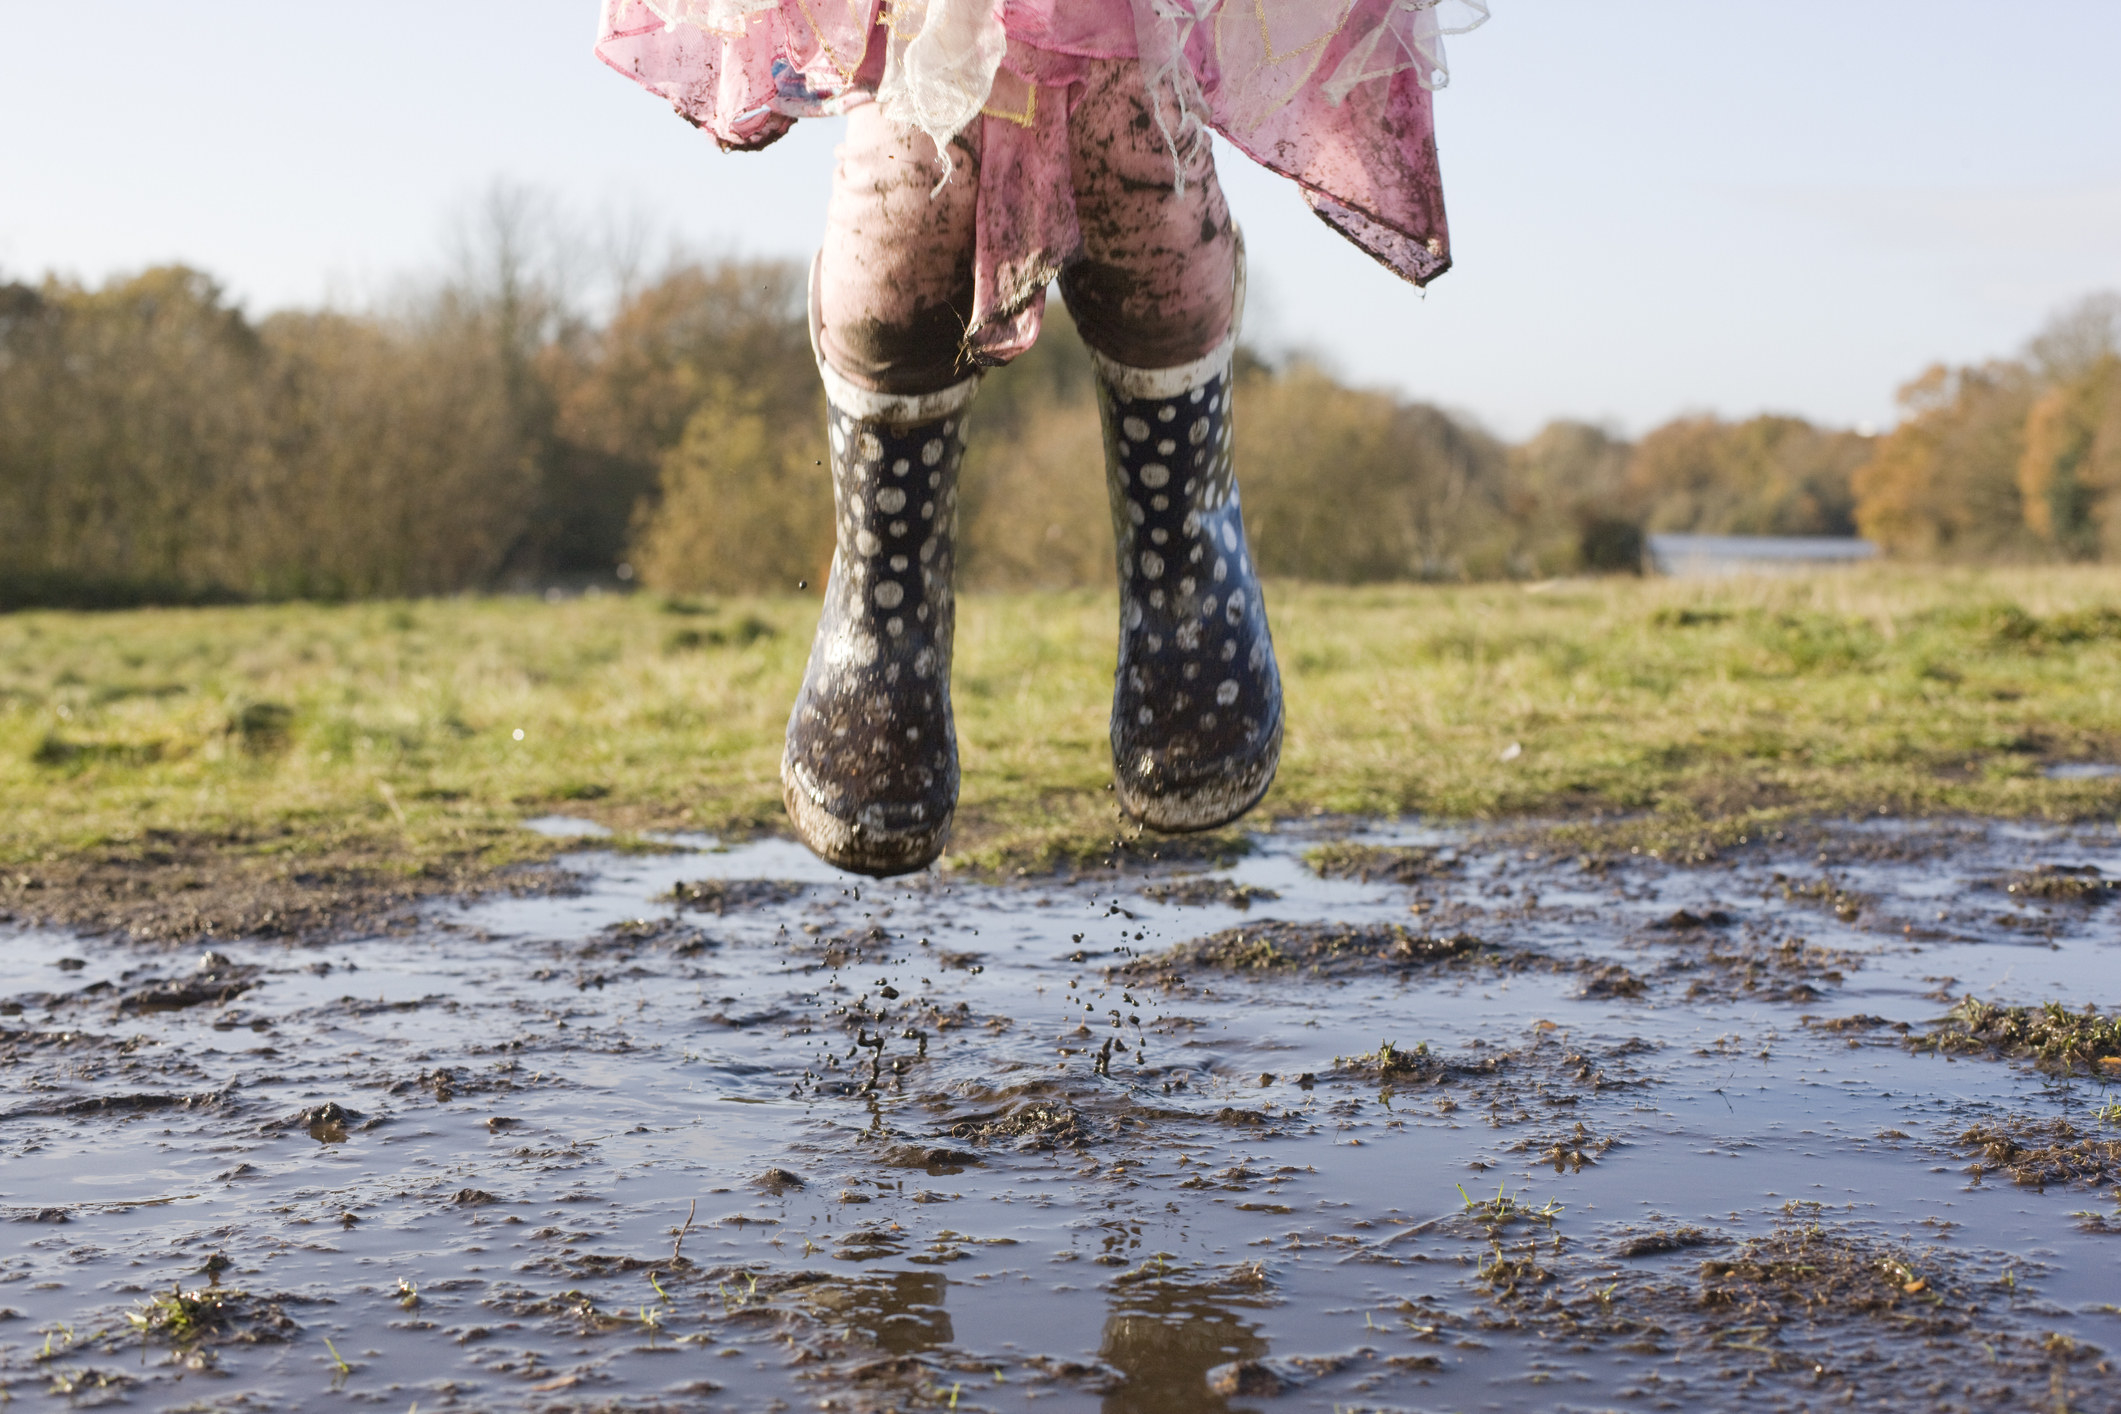 A child jumping in a puddle of mud